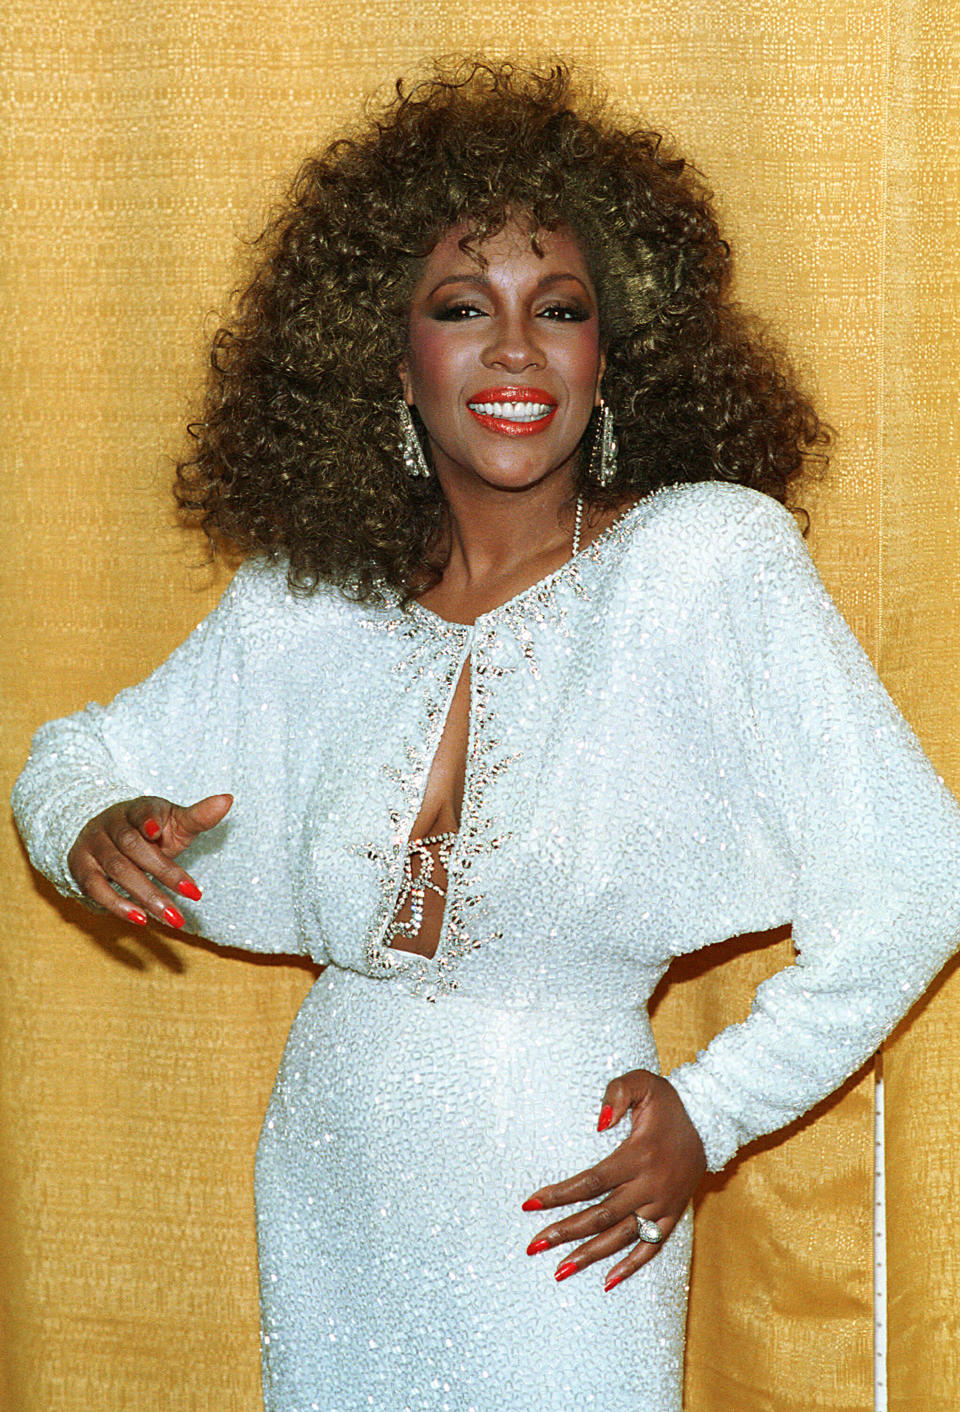 Mary Wilson at the Soul Train Music Awards in Los Angeles on March 23, 1987.